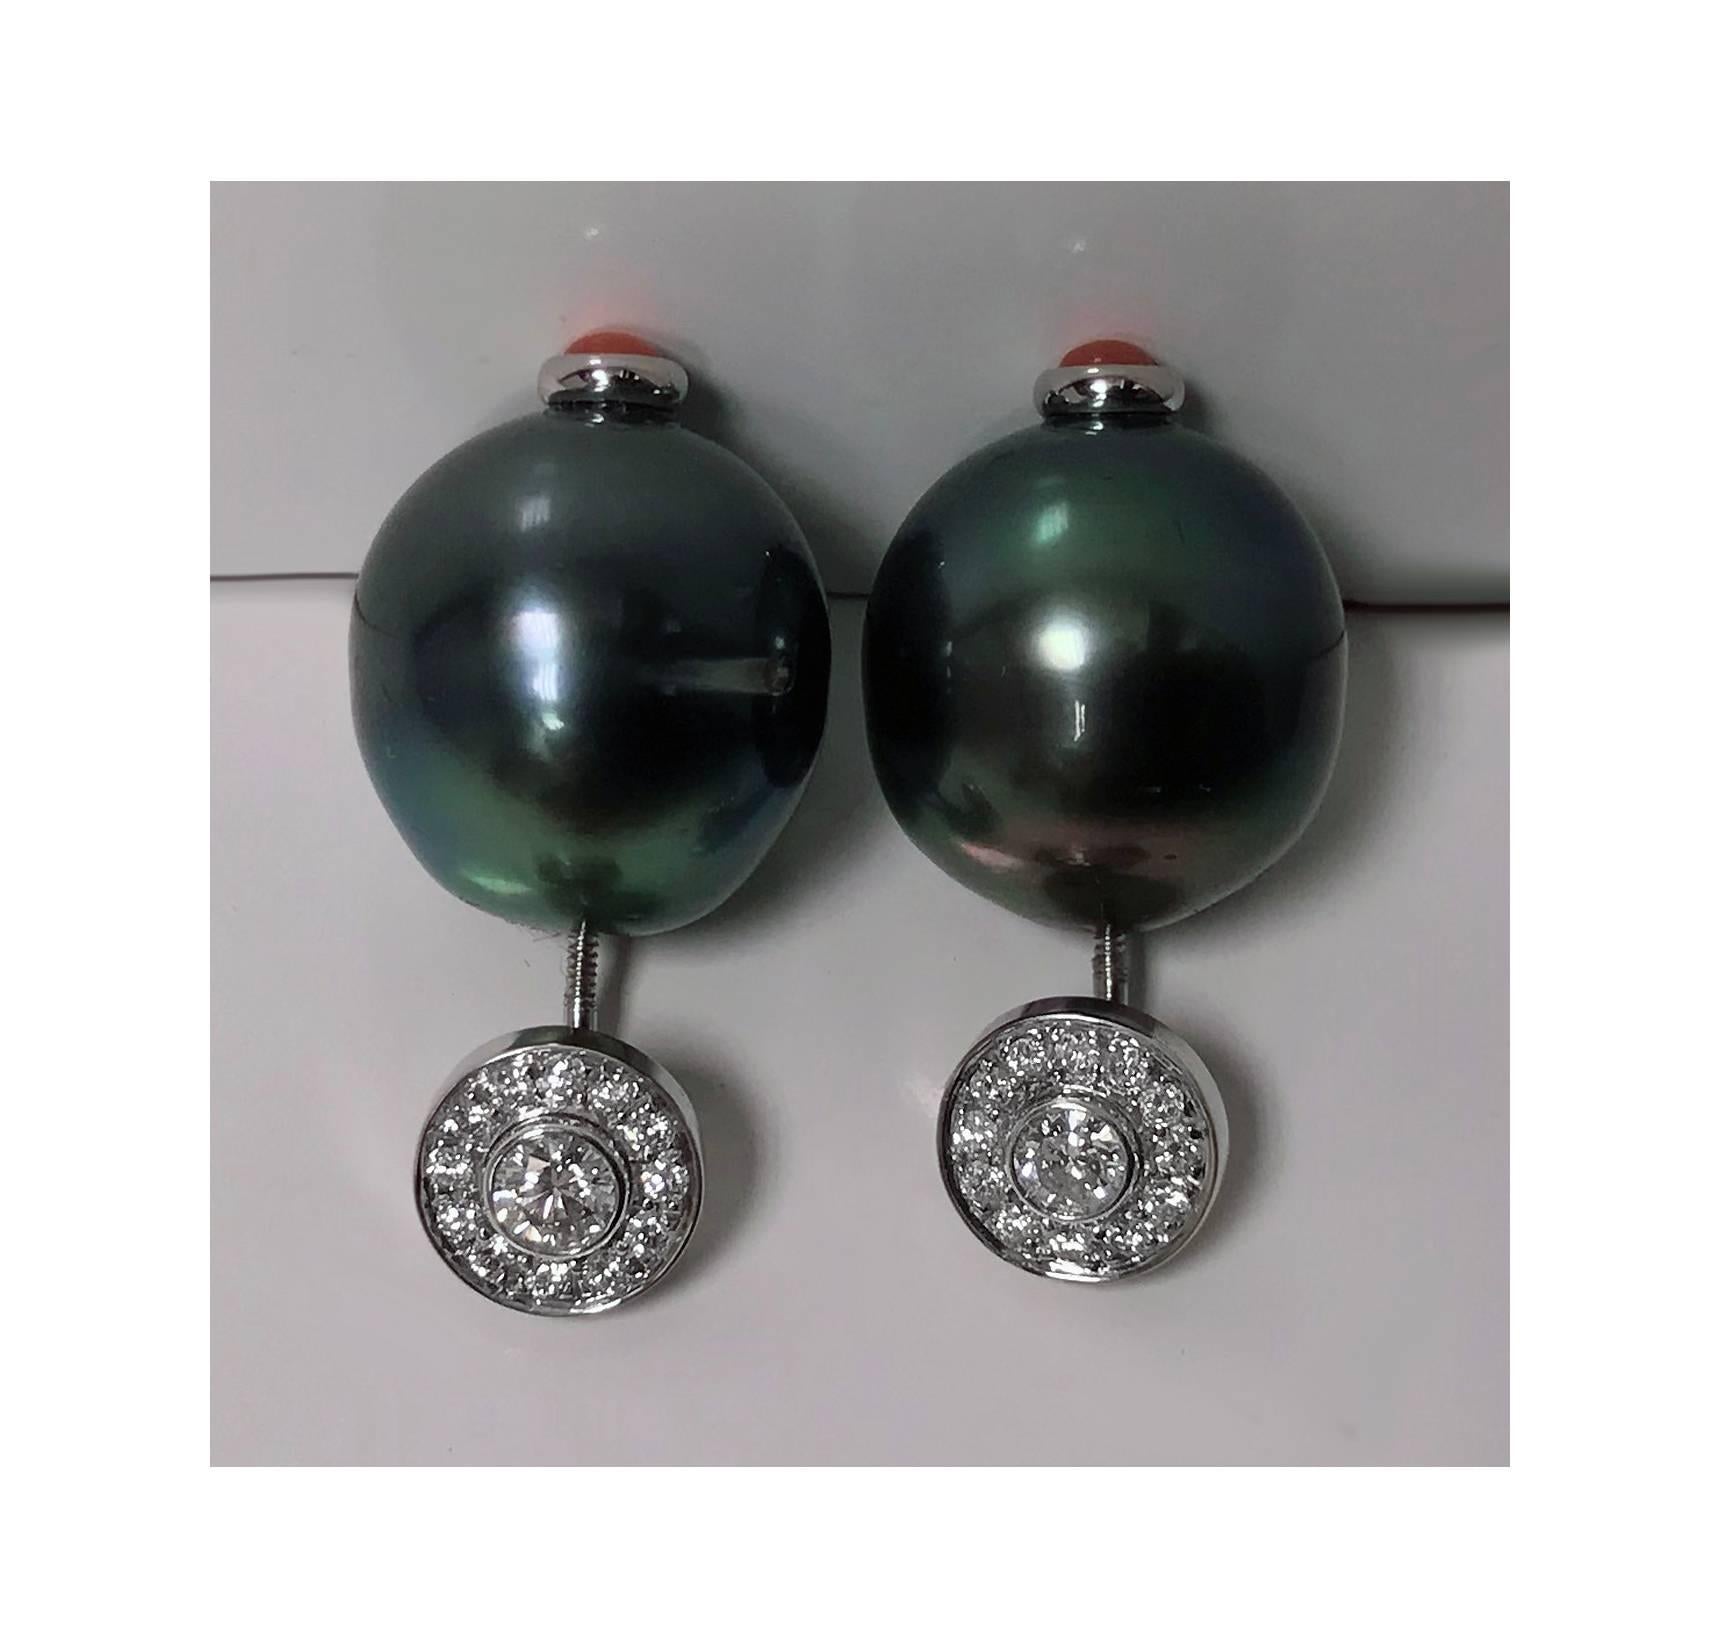 Pair 18K white gold Diamond, Black Tahitian Pearl Earrings. Each Earring with ovoid black Tahitian cultured pearl gauging approximately 15.5 mm, blemished, good lustre, green peacock overtones, the top with round brilliant cut detachable diamond